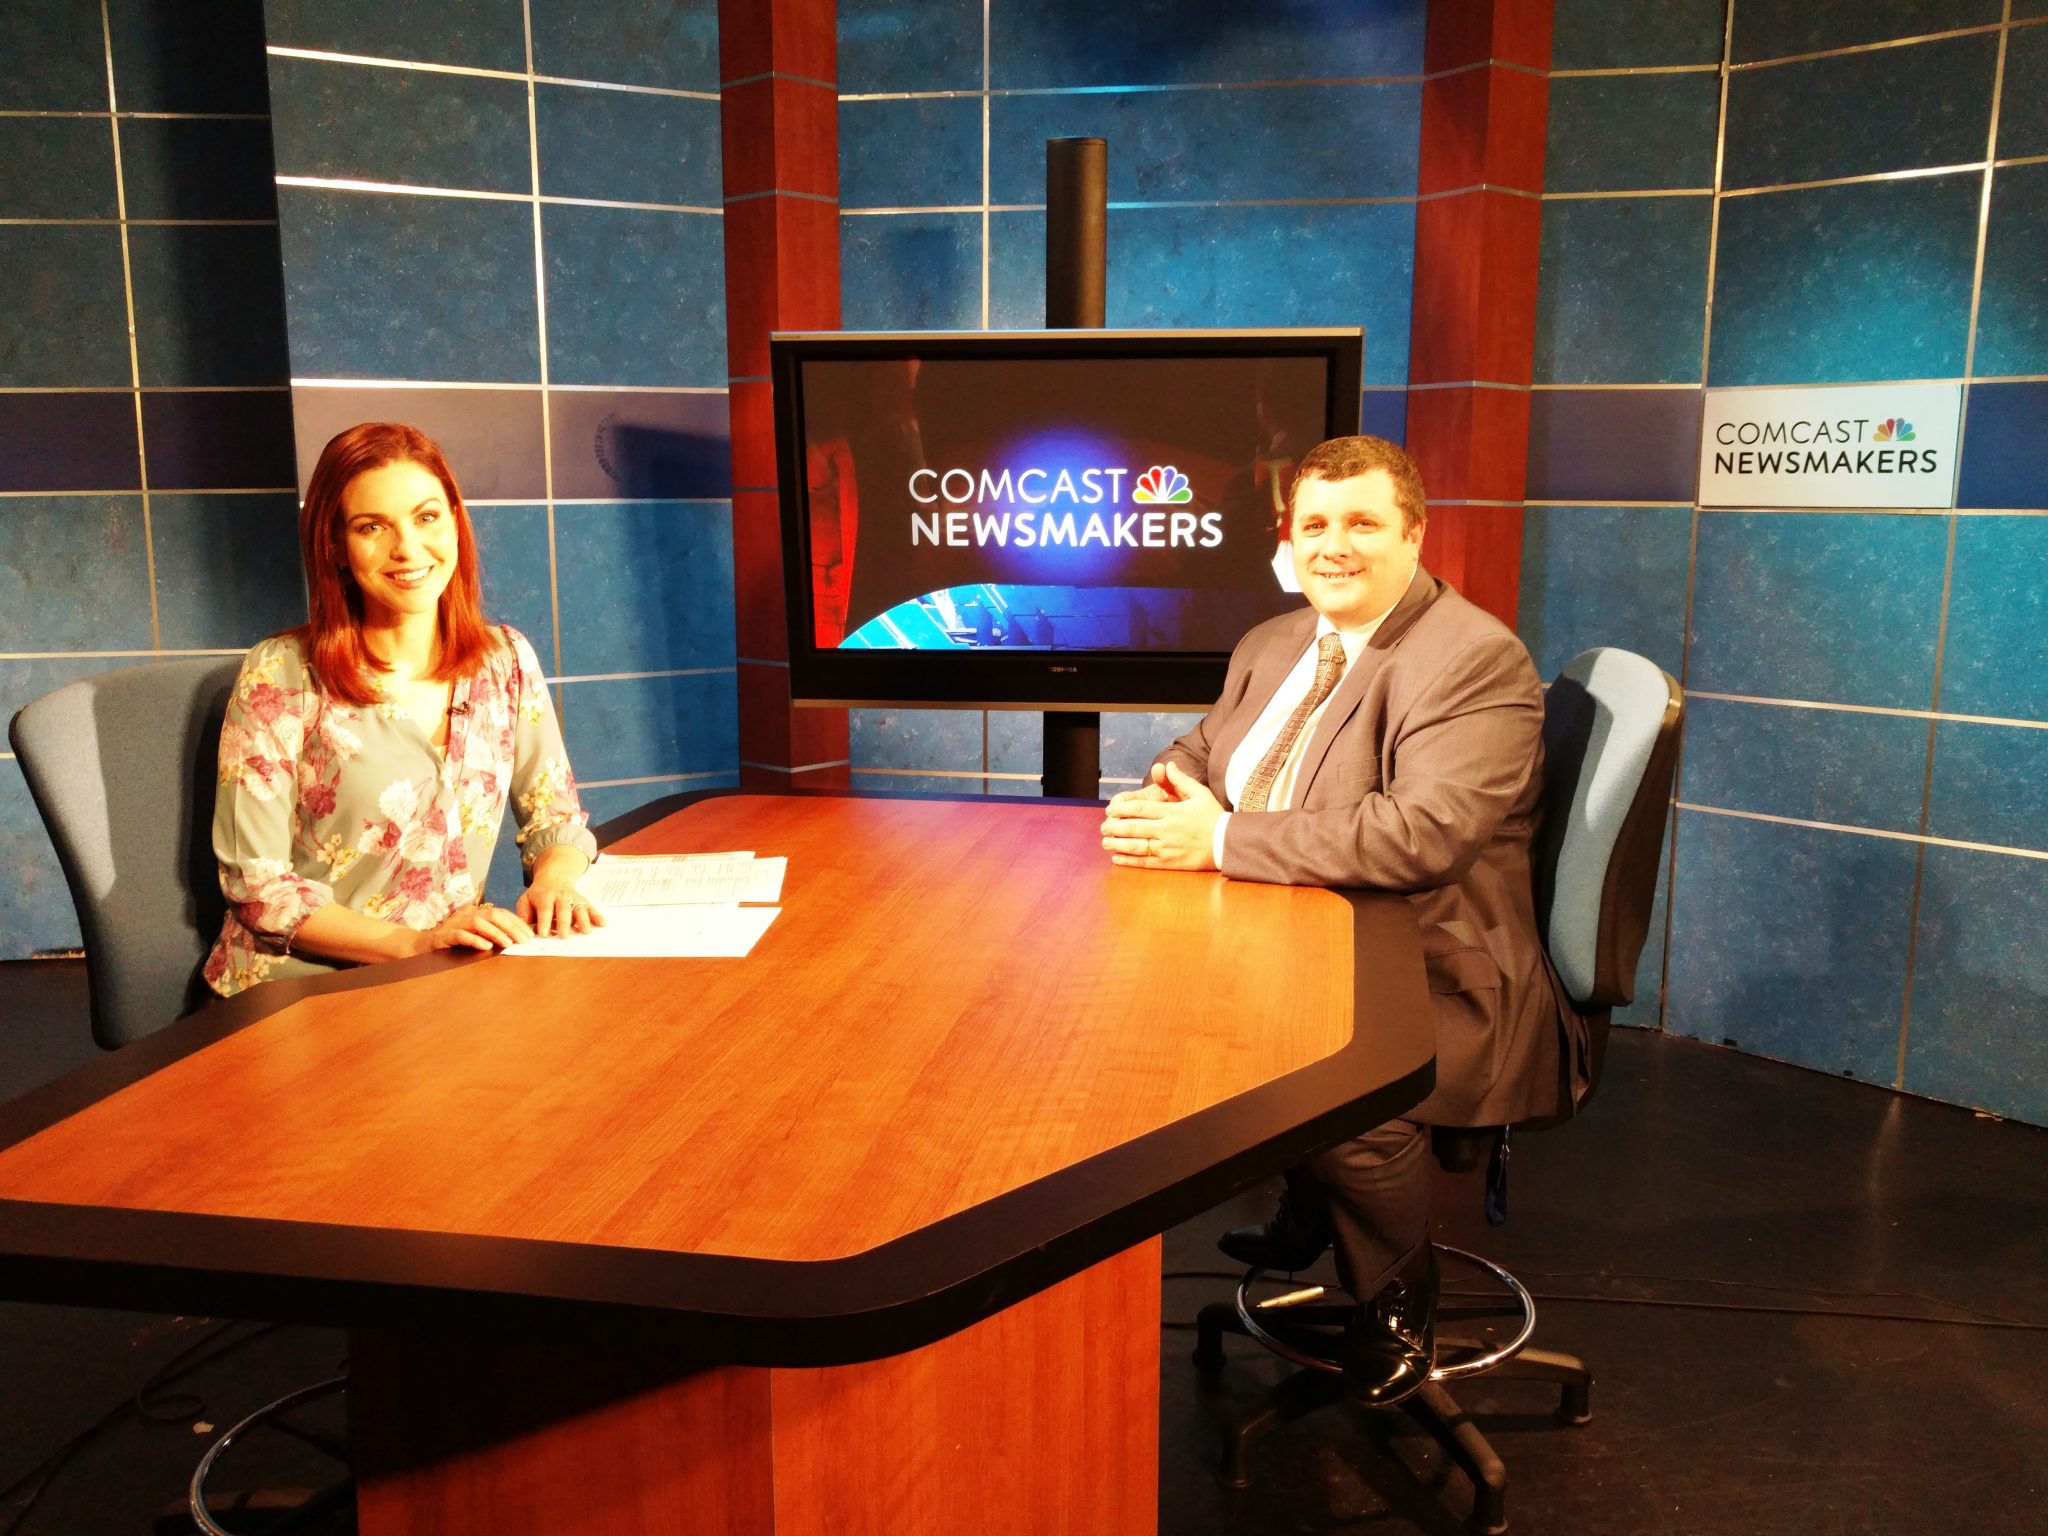 Comcast Newsmakers 2